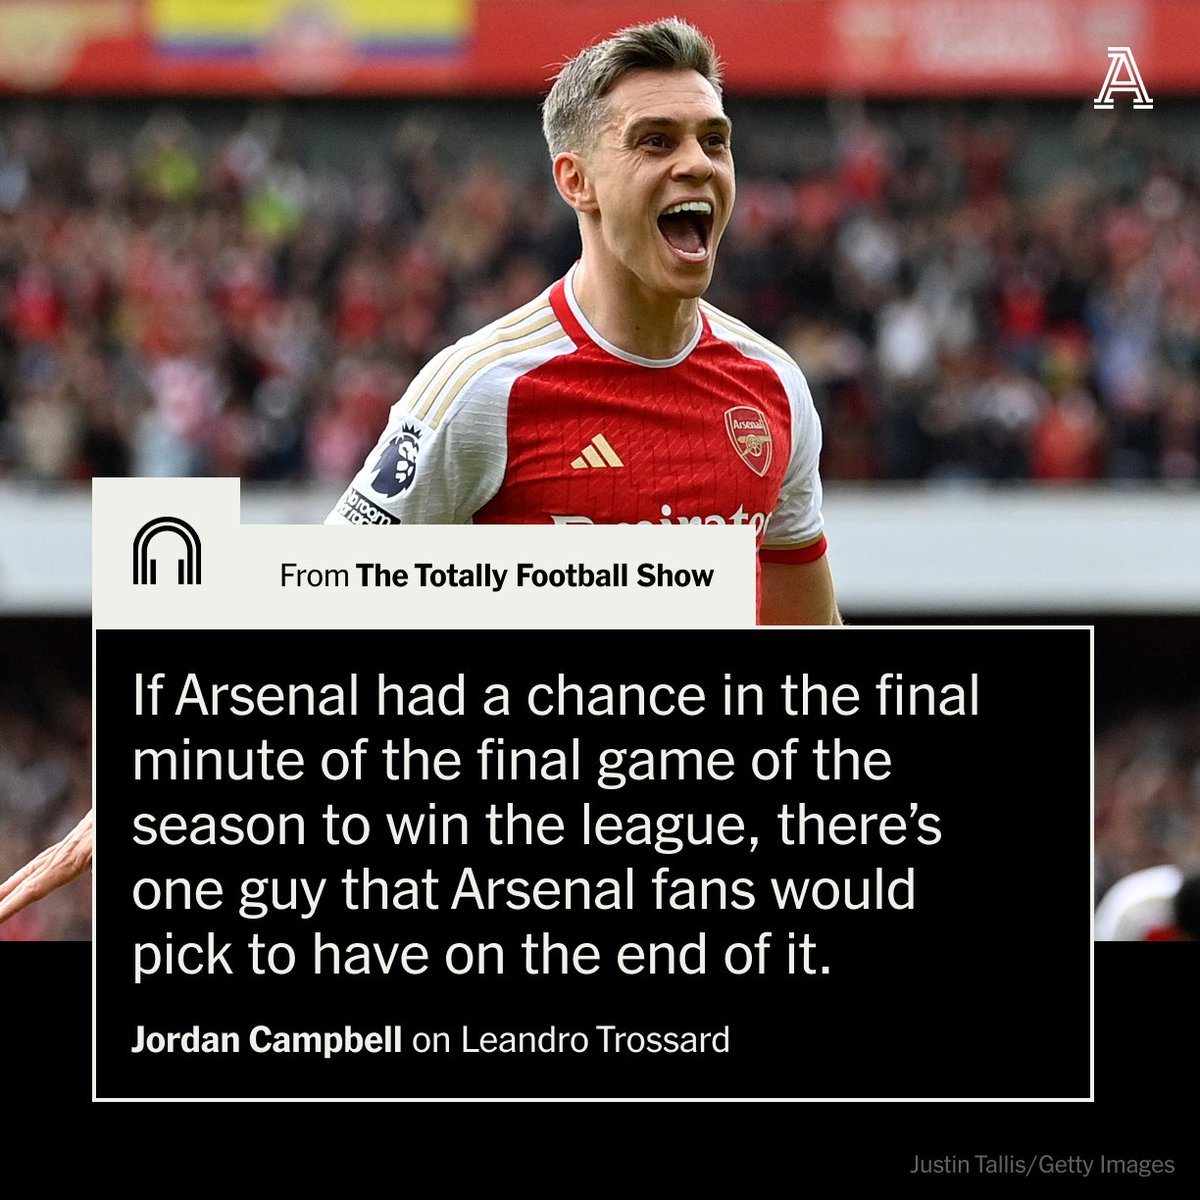 It's the 90th minute of Arsenal's final game and there's a chance to win the title... @JordanC1107 says Leandro Trossard is the man all Gunners fans would want it to fall to 🎯 🎧 @TheTotallyShow